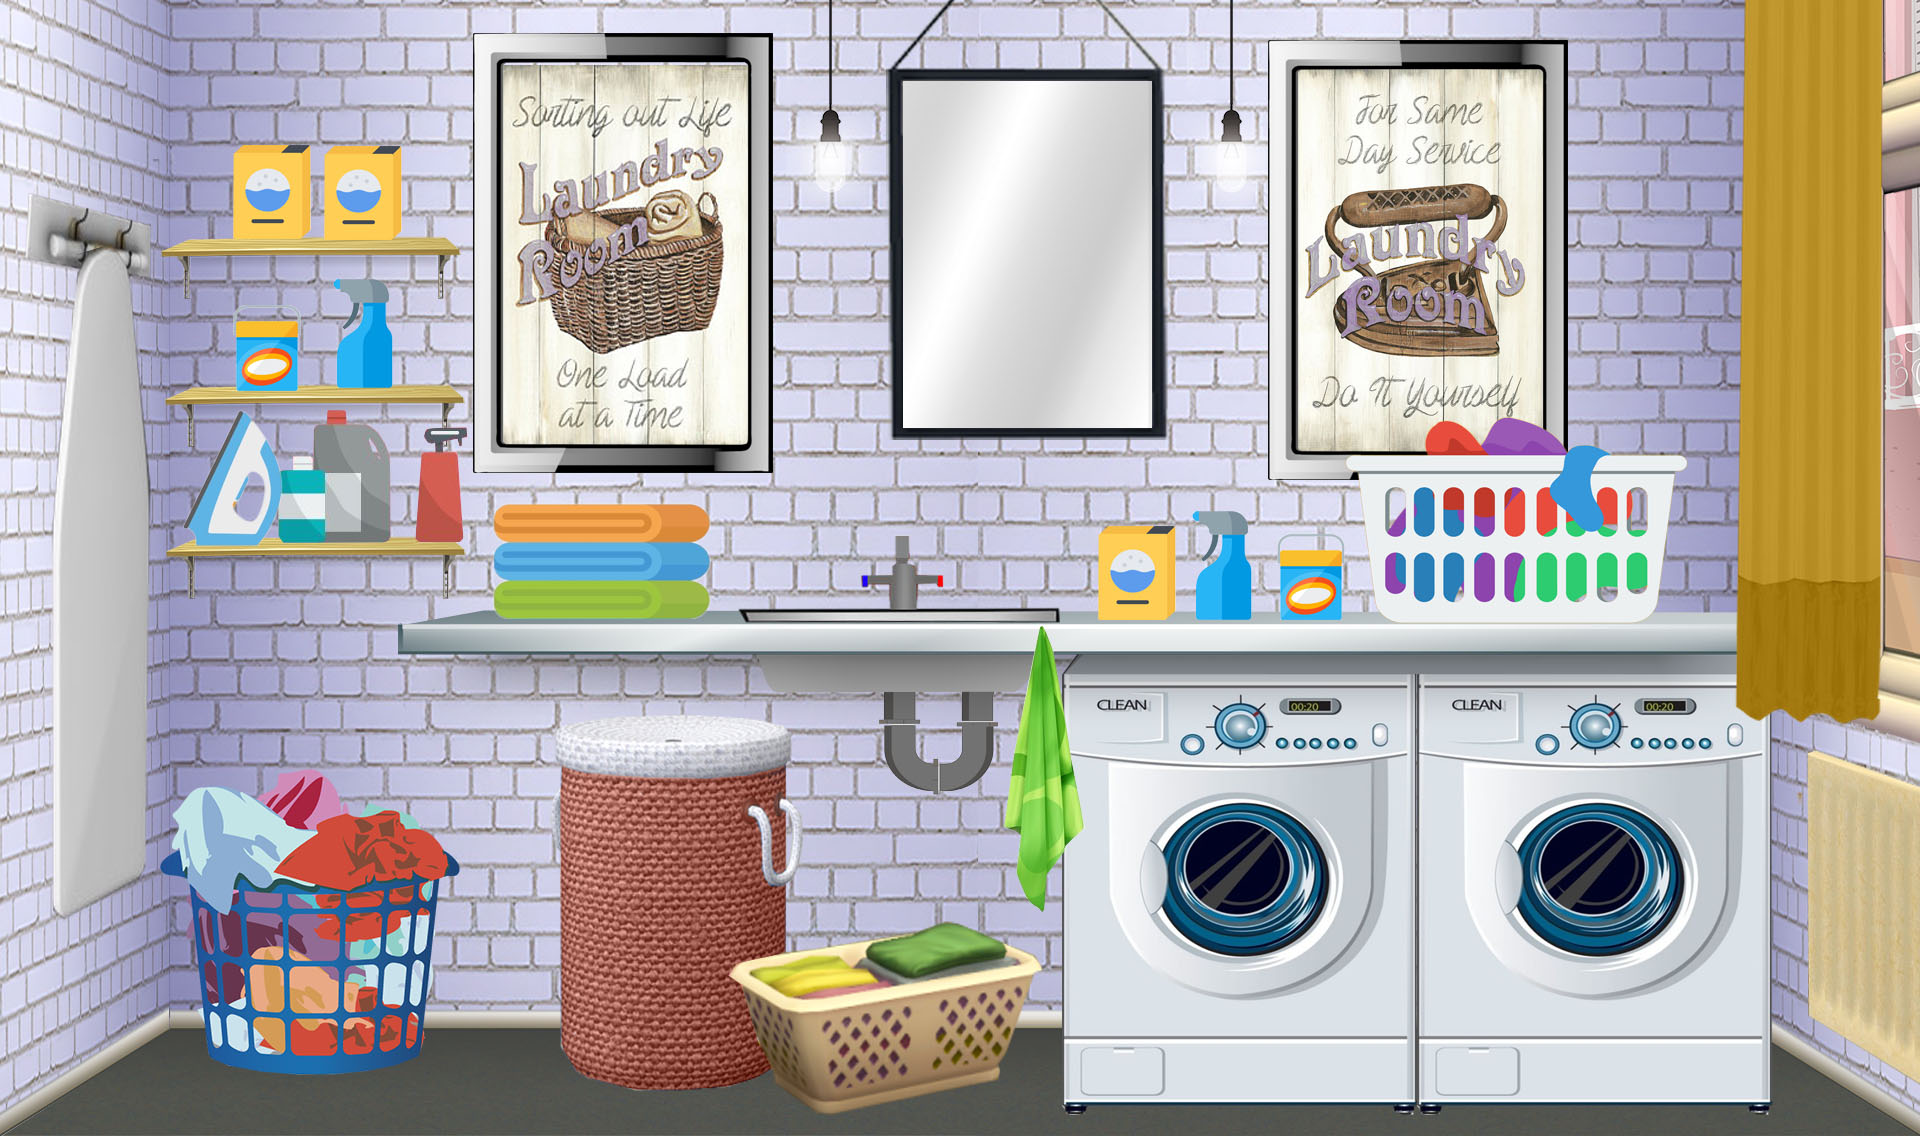 INT. APARTMENT LAUNDRY – DAY